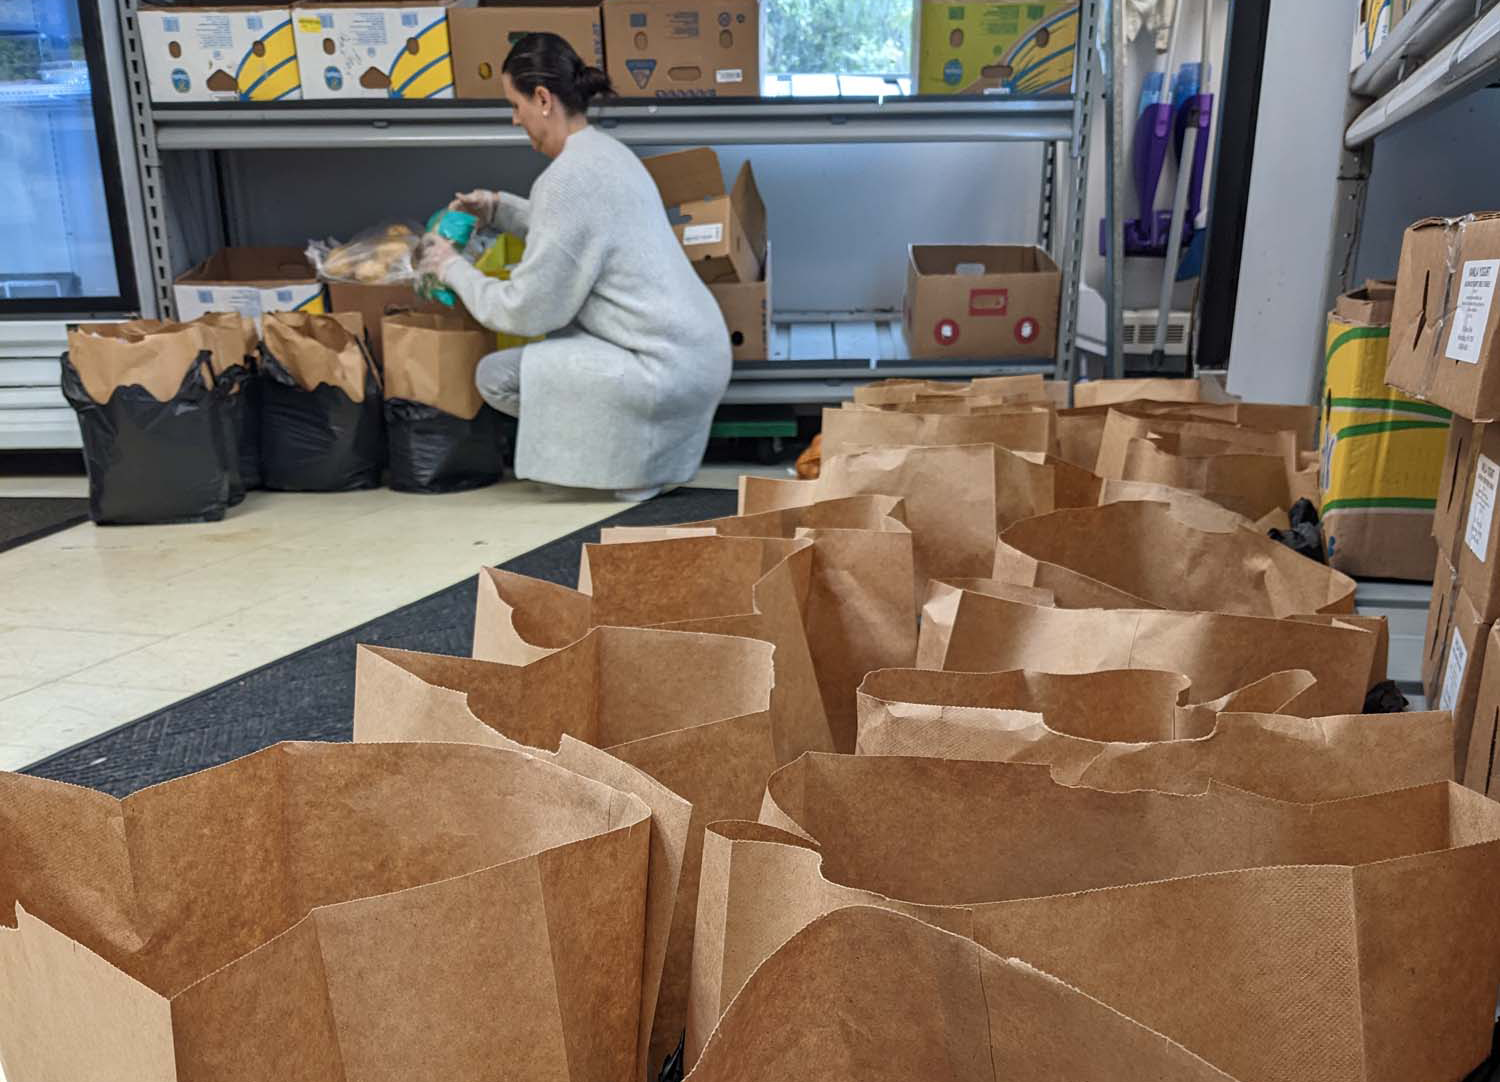 A photo taken in a food pantry, a woman crouches down and packs food into brown bags